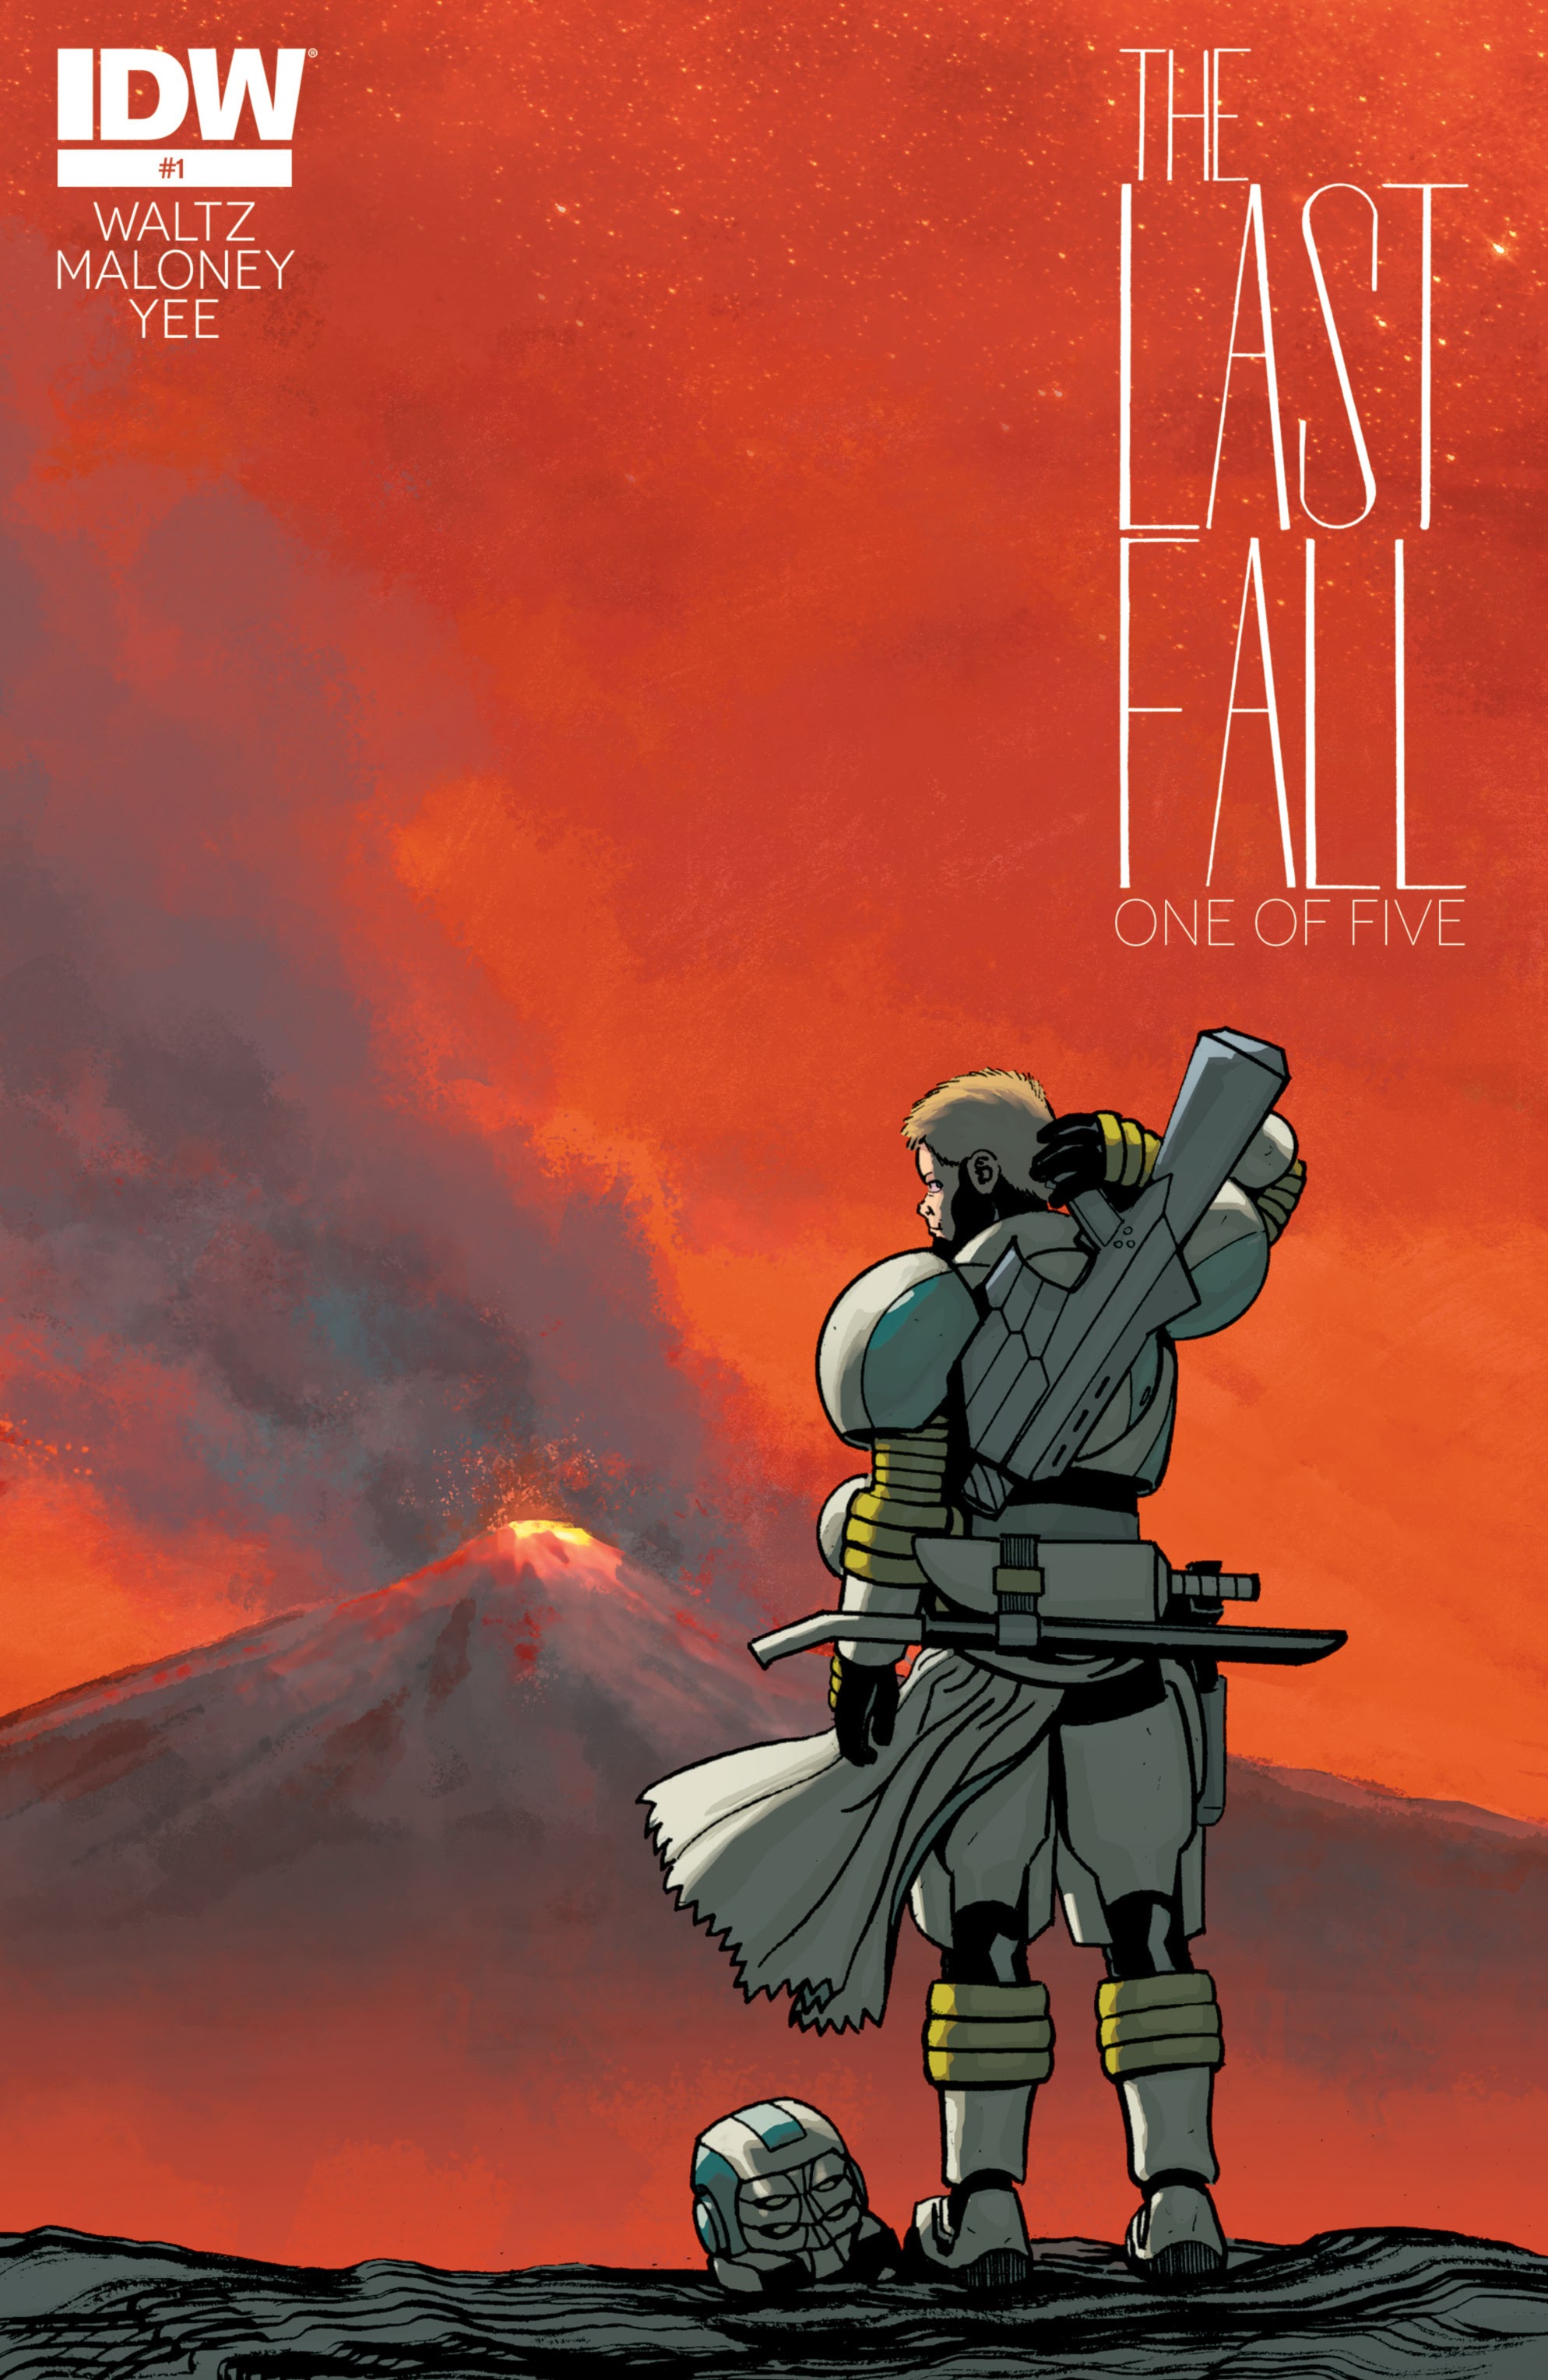 Read online The Last Fall comic -  Issue #1 - 1